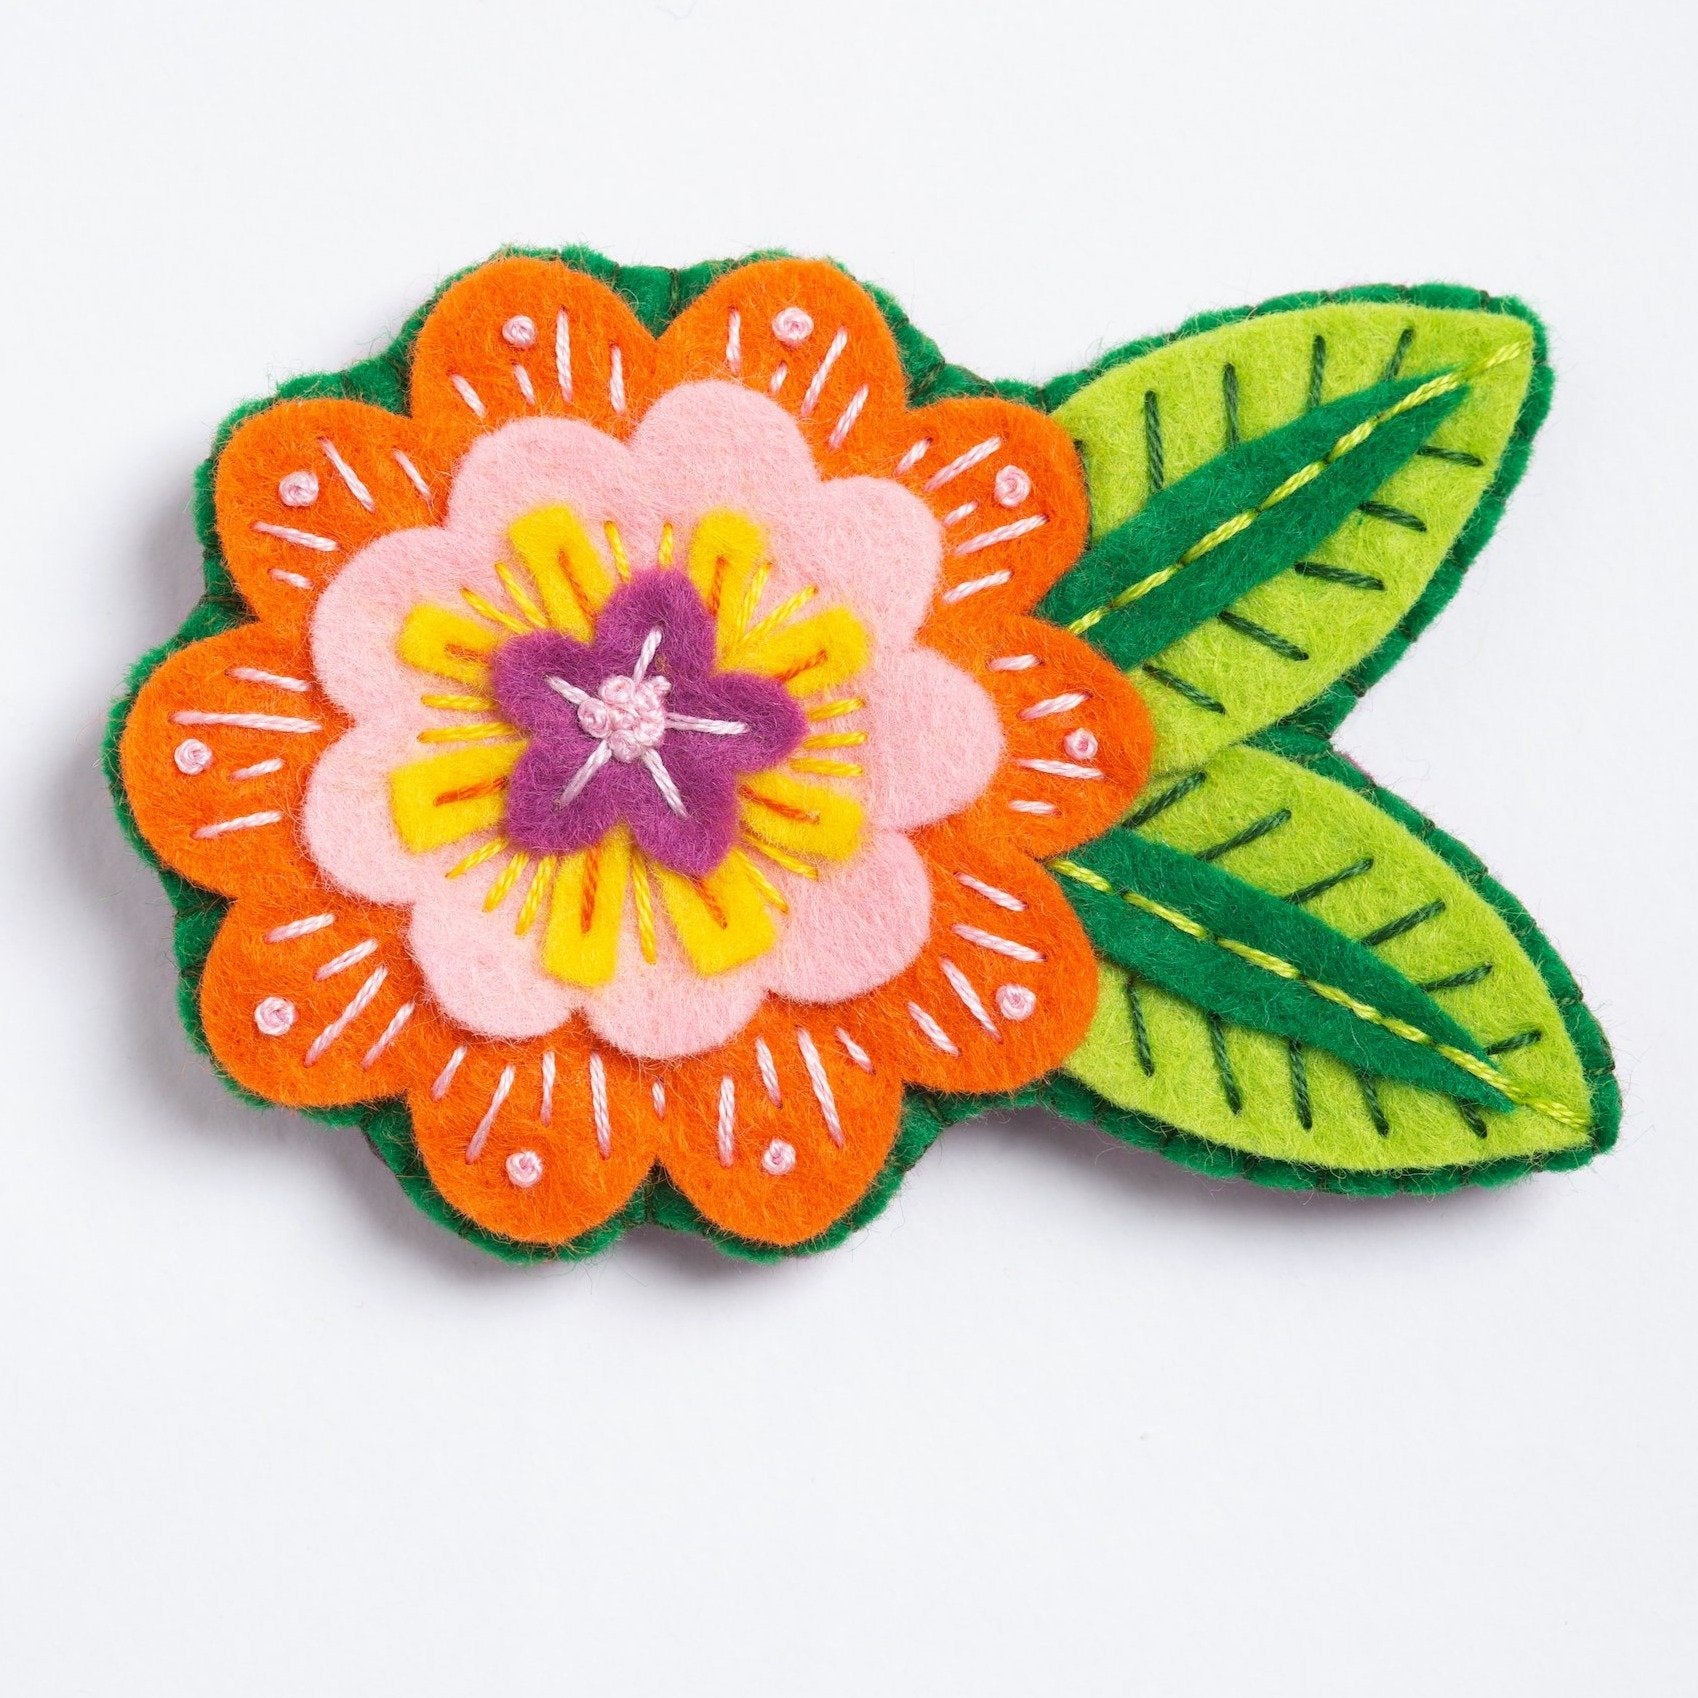 Clipped image of margery flower brooch on white background